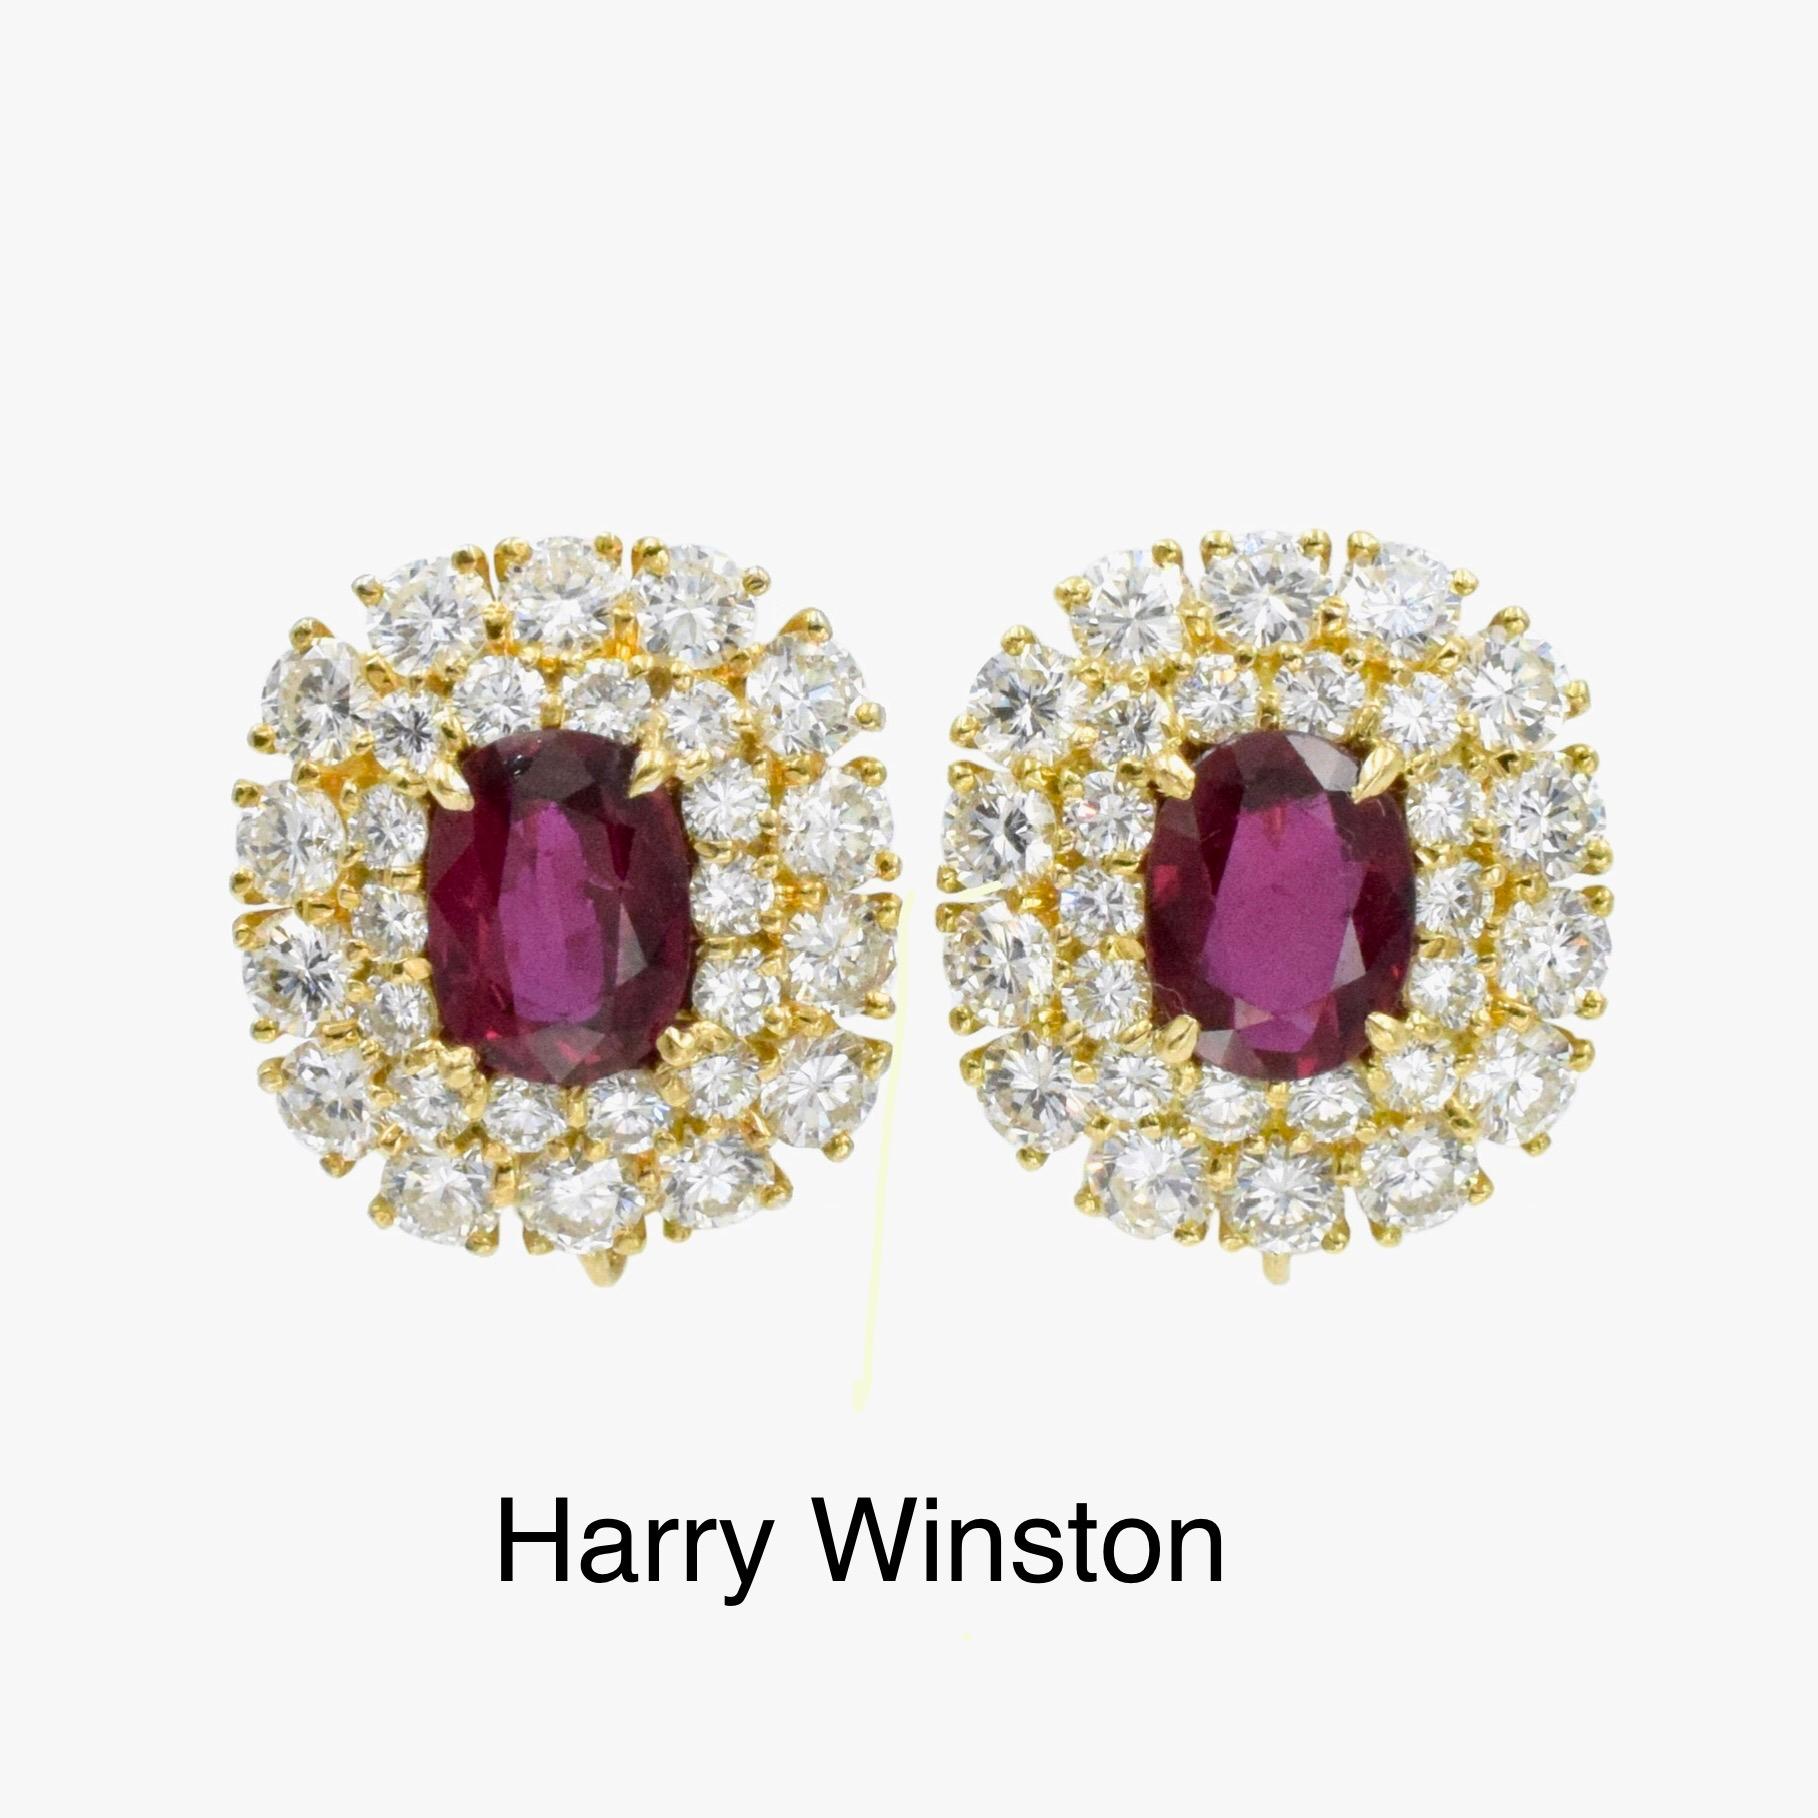 Diamond and Ruby Earrings by Jacques Timey for Harry Winston This pair of
earrings has 2 oval shape rubies weighing a total of approximately 4
carats in the center of 56 round diamonds weighing a total of approximately 6.5 carats all set in 18k